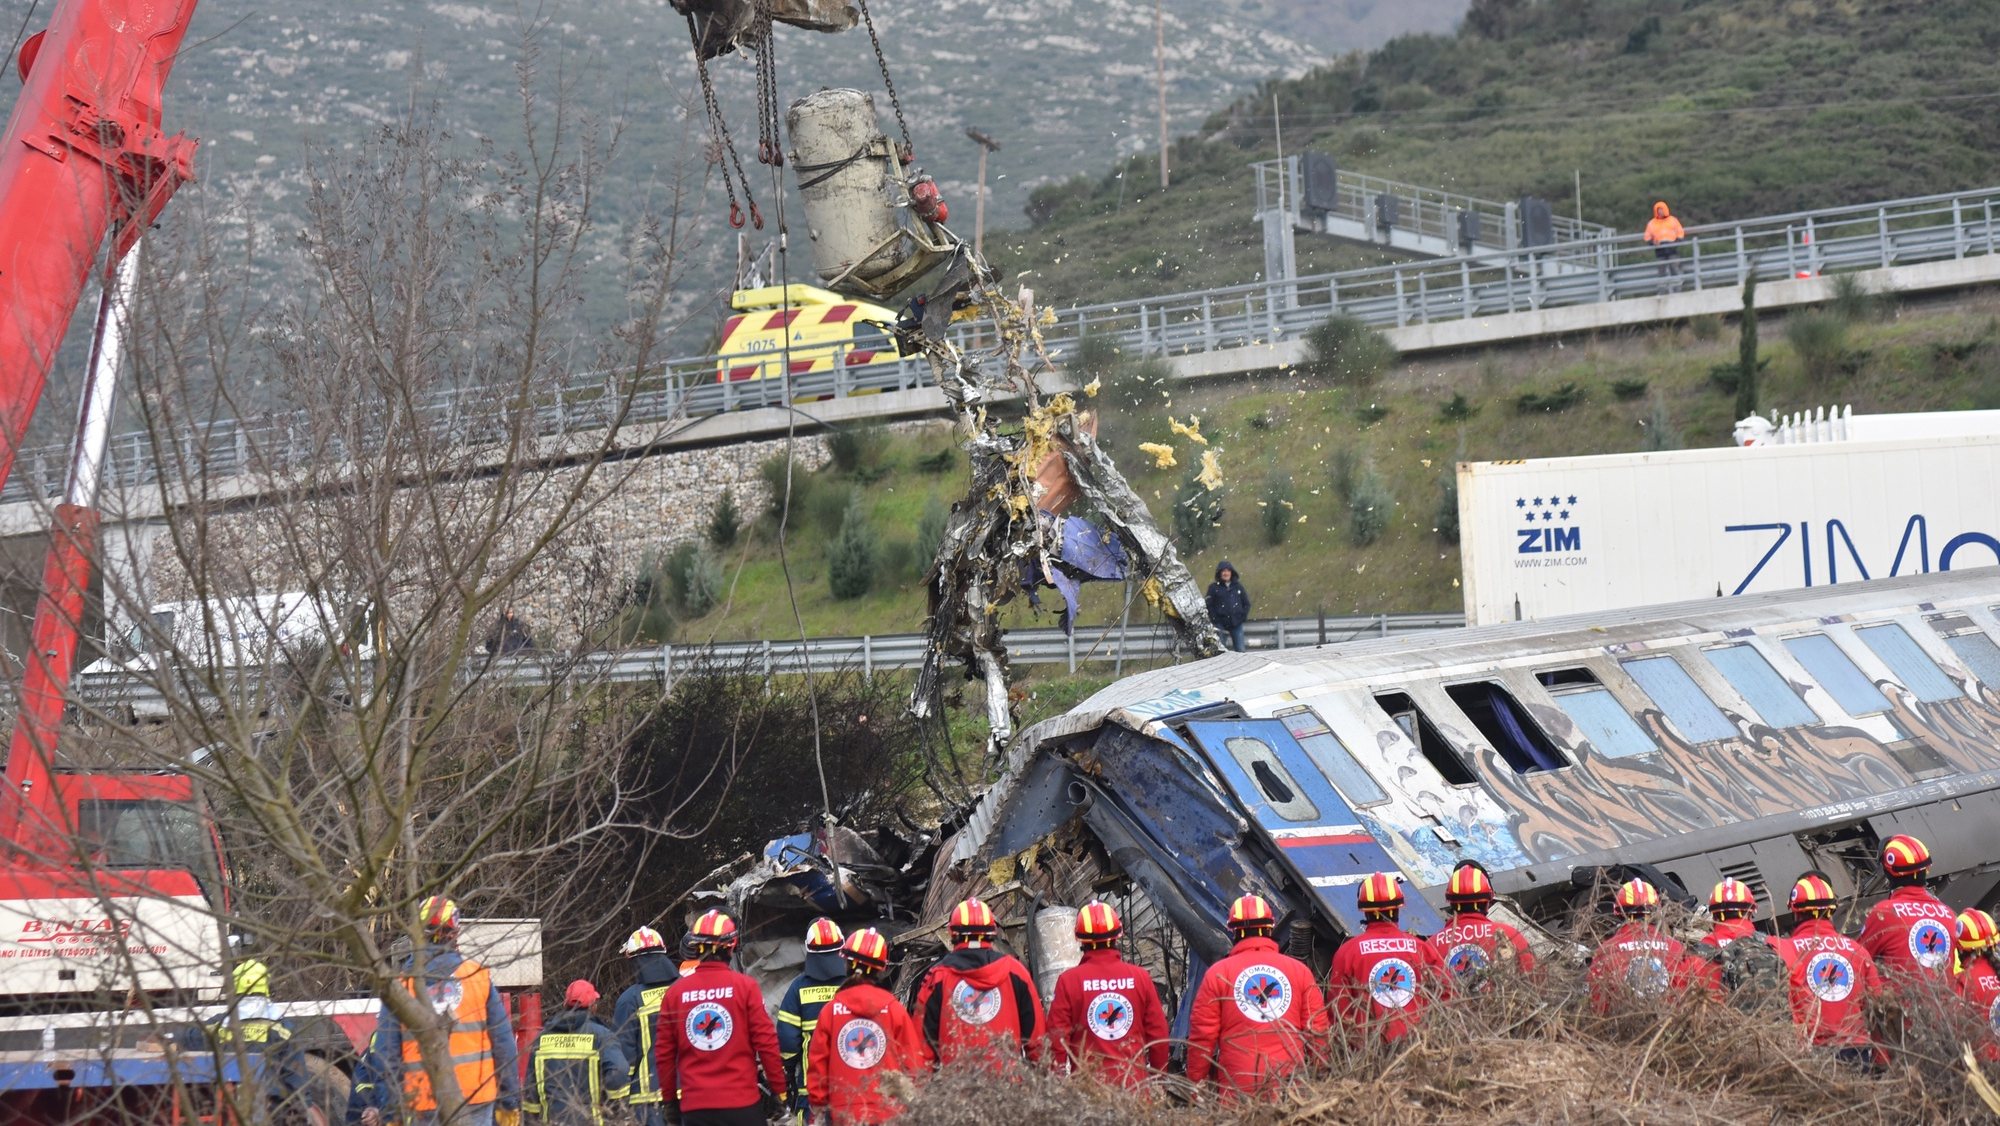 epa10497207 Crane vehicles try to remove pieces of damaged train wagons after a collision near Larissa city, Greece, 01 March 2023. Fire fighter and ambulance service crews remain at the scene, while special crews were using cutting tools and blow torches to cut and prise apart the remains of the carriages to look for people or bodies possibly trapped inside. According to the latest update by the fire brigade spokesperson Vasilis Vathrakogiannis, the death toll was 36 so far and 66 people had been taken to hospital, six of which were admitted to ICUs.  EPA/APOSTOLIS DOMALIS